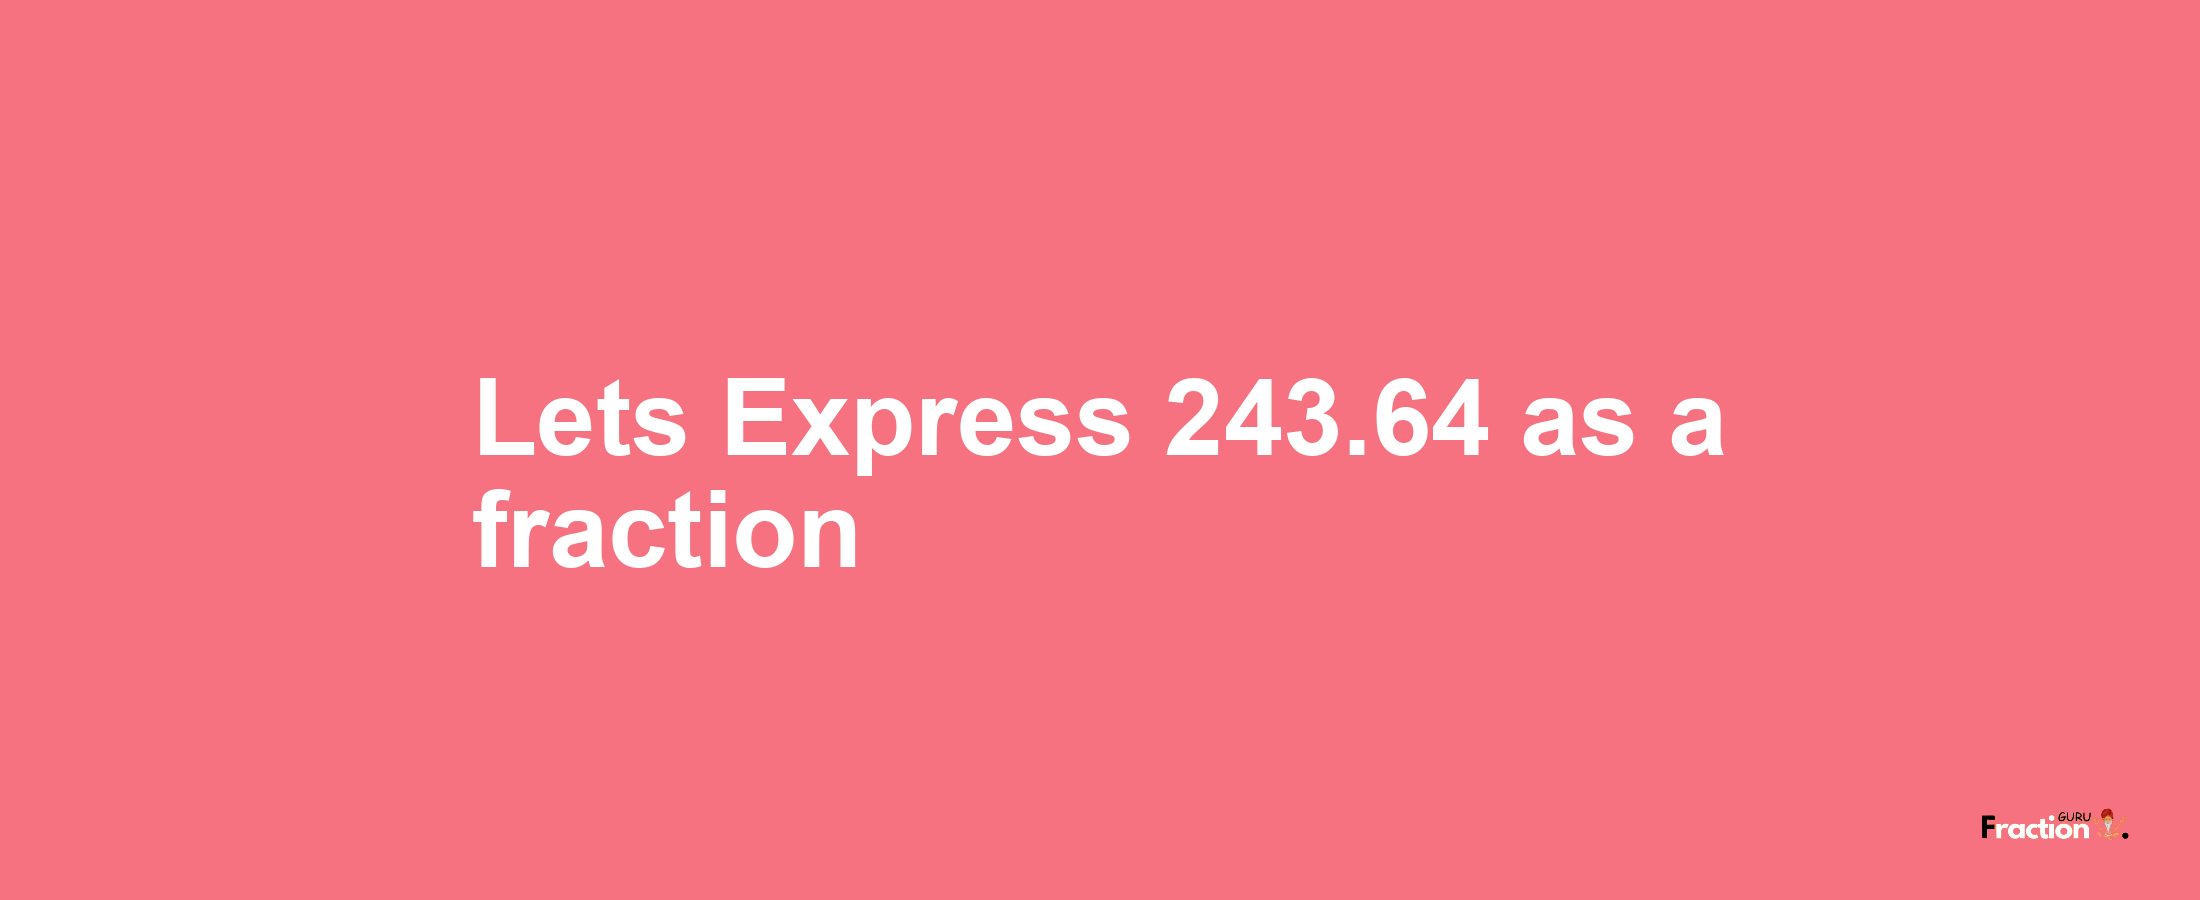 Lets Express 243.64 as afraction